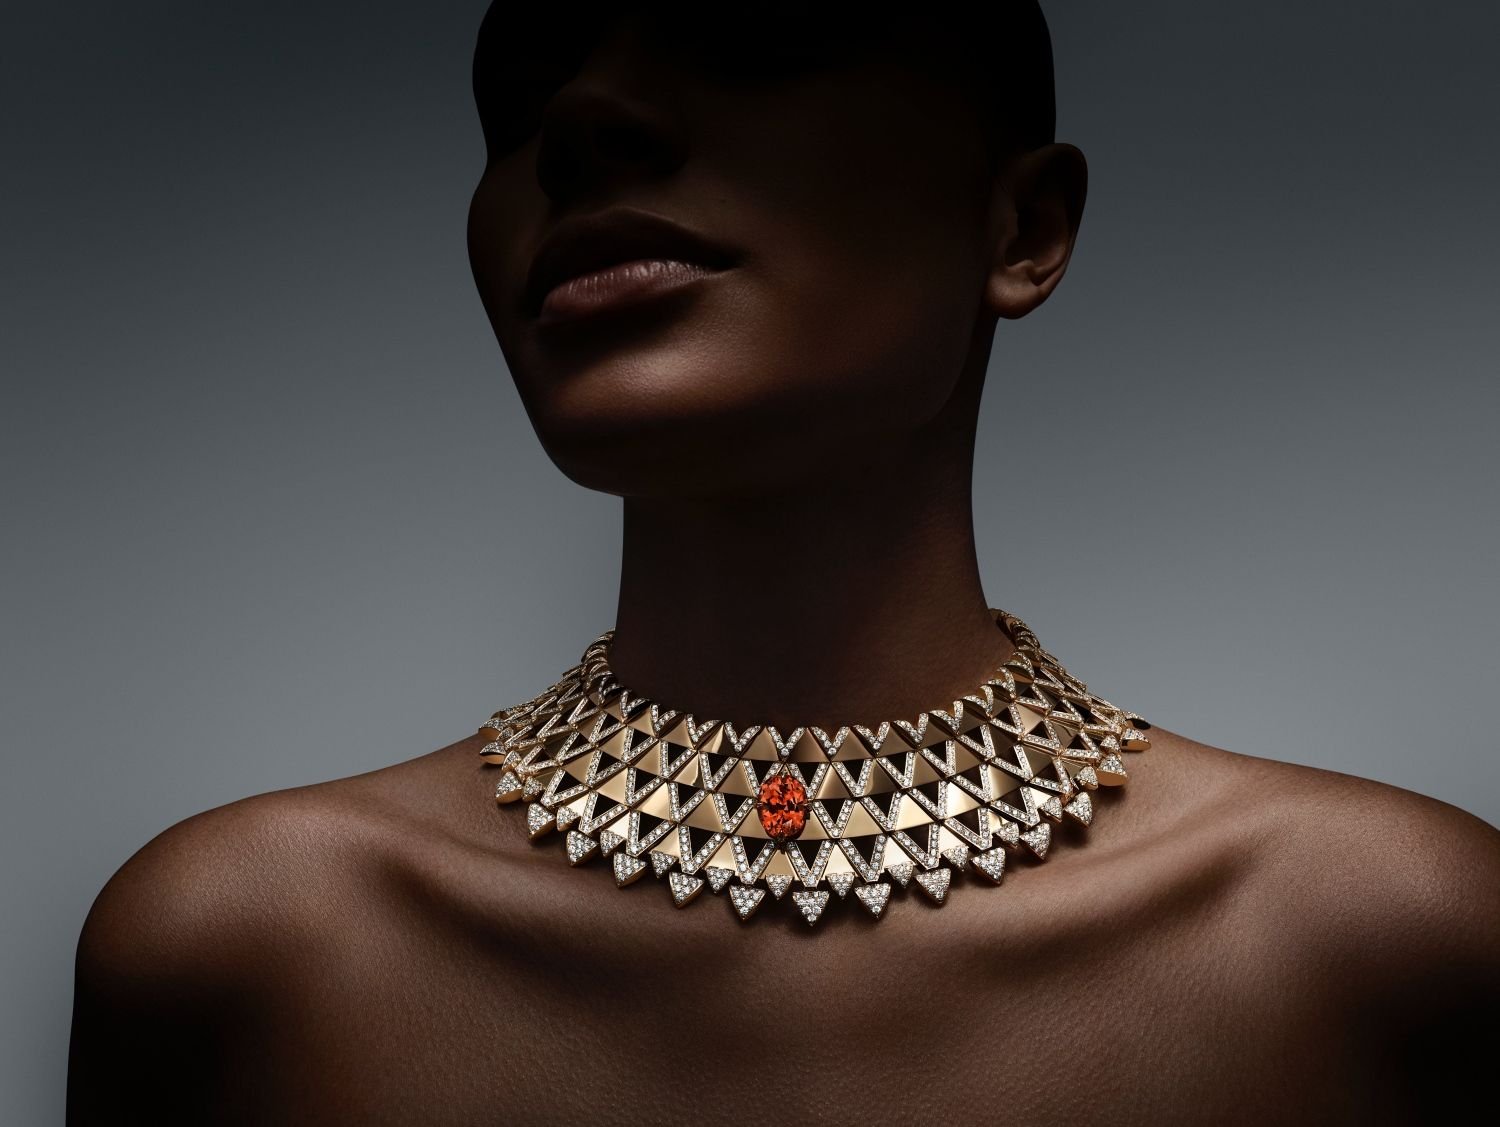 Warrior Spirit: Jewelry That Shield and Make Us Courageous